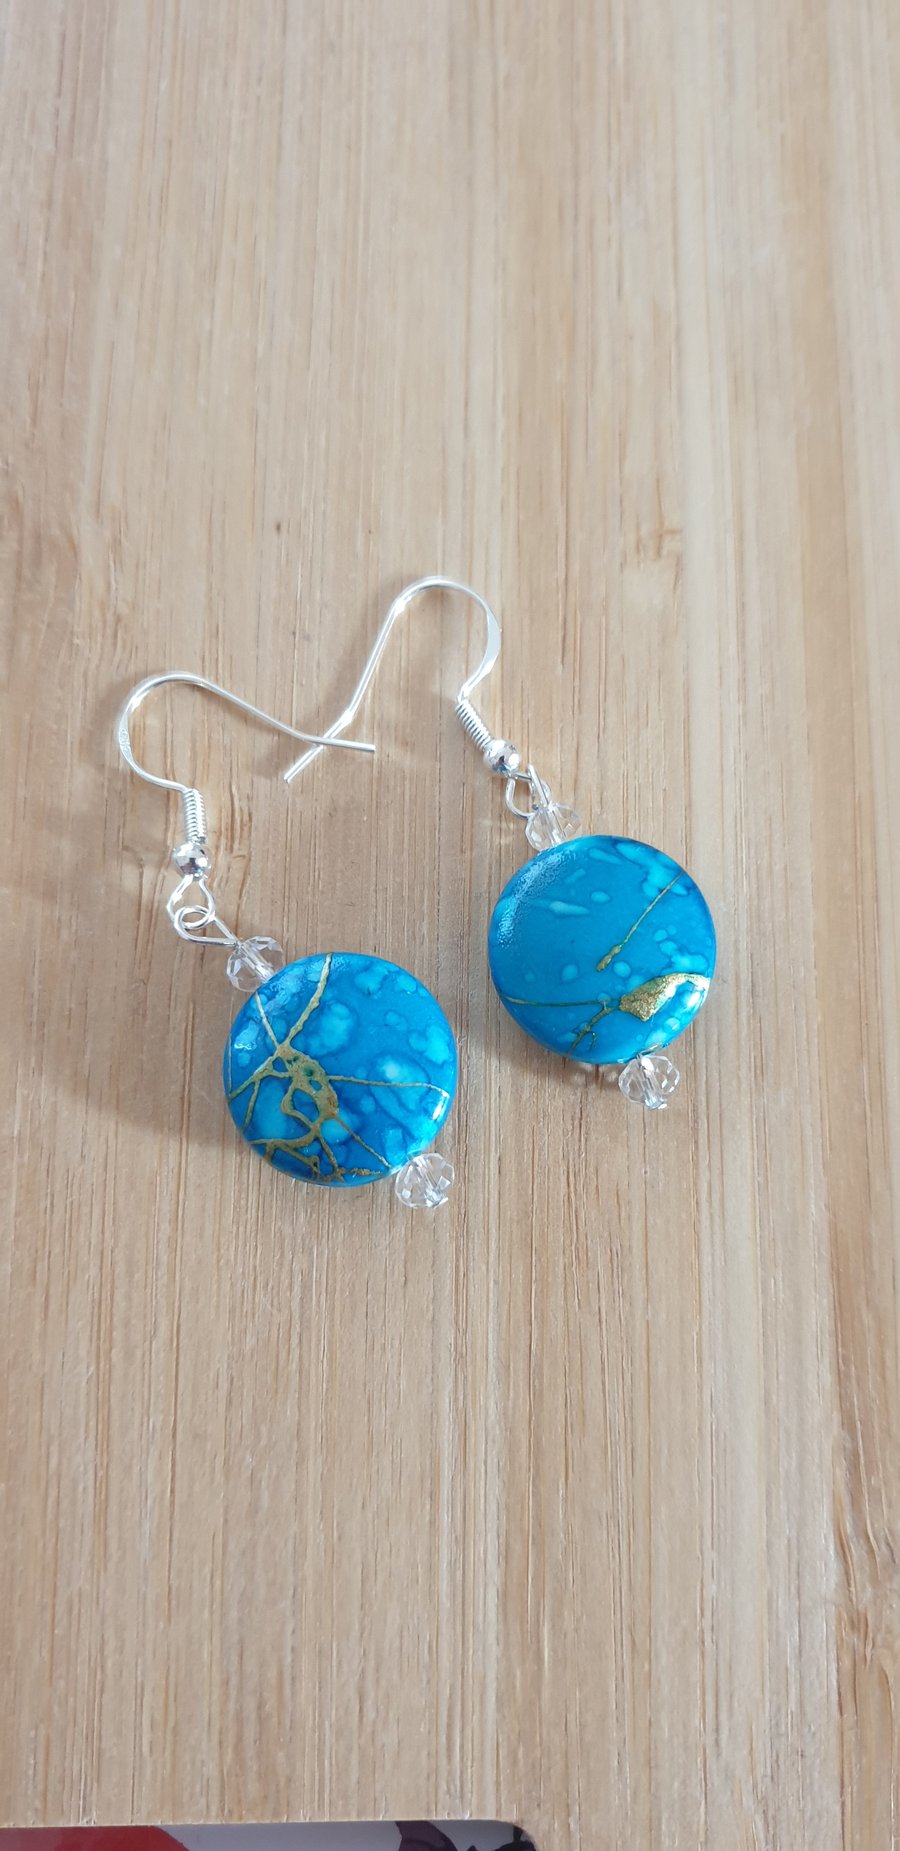 Turquoise round earrings